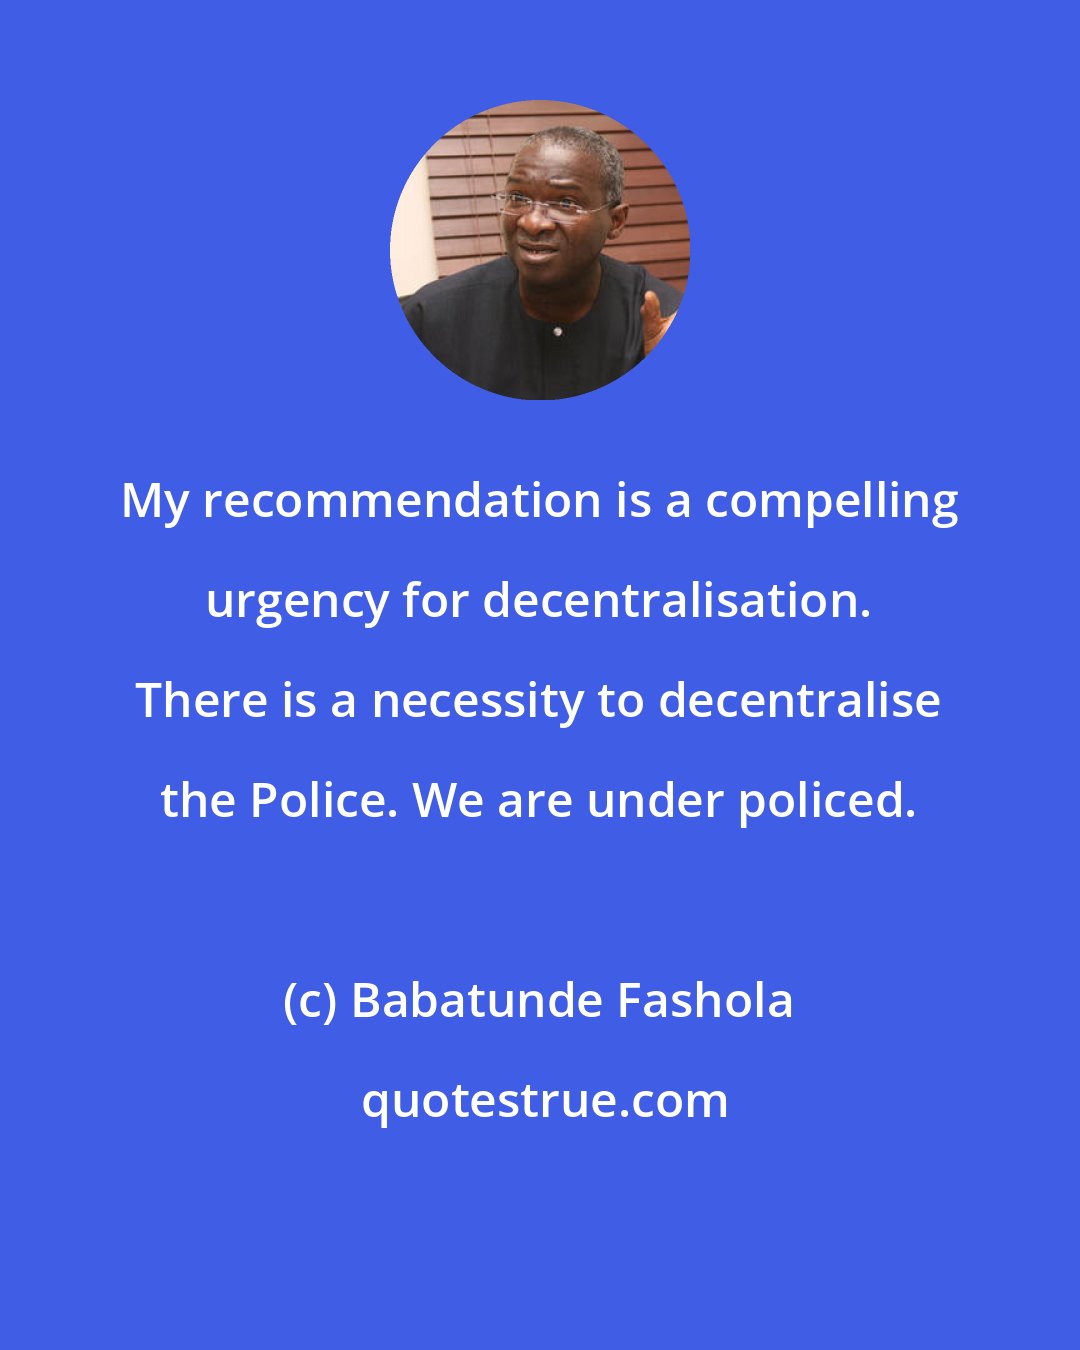 Babatunde Fashola: My recommendation is a compelling urgency for decentralisation. There is a necessity to decentralise the Police. We are under policed.